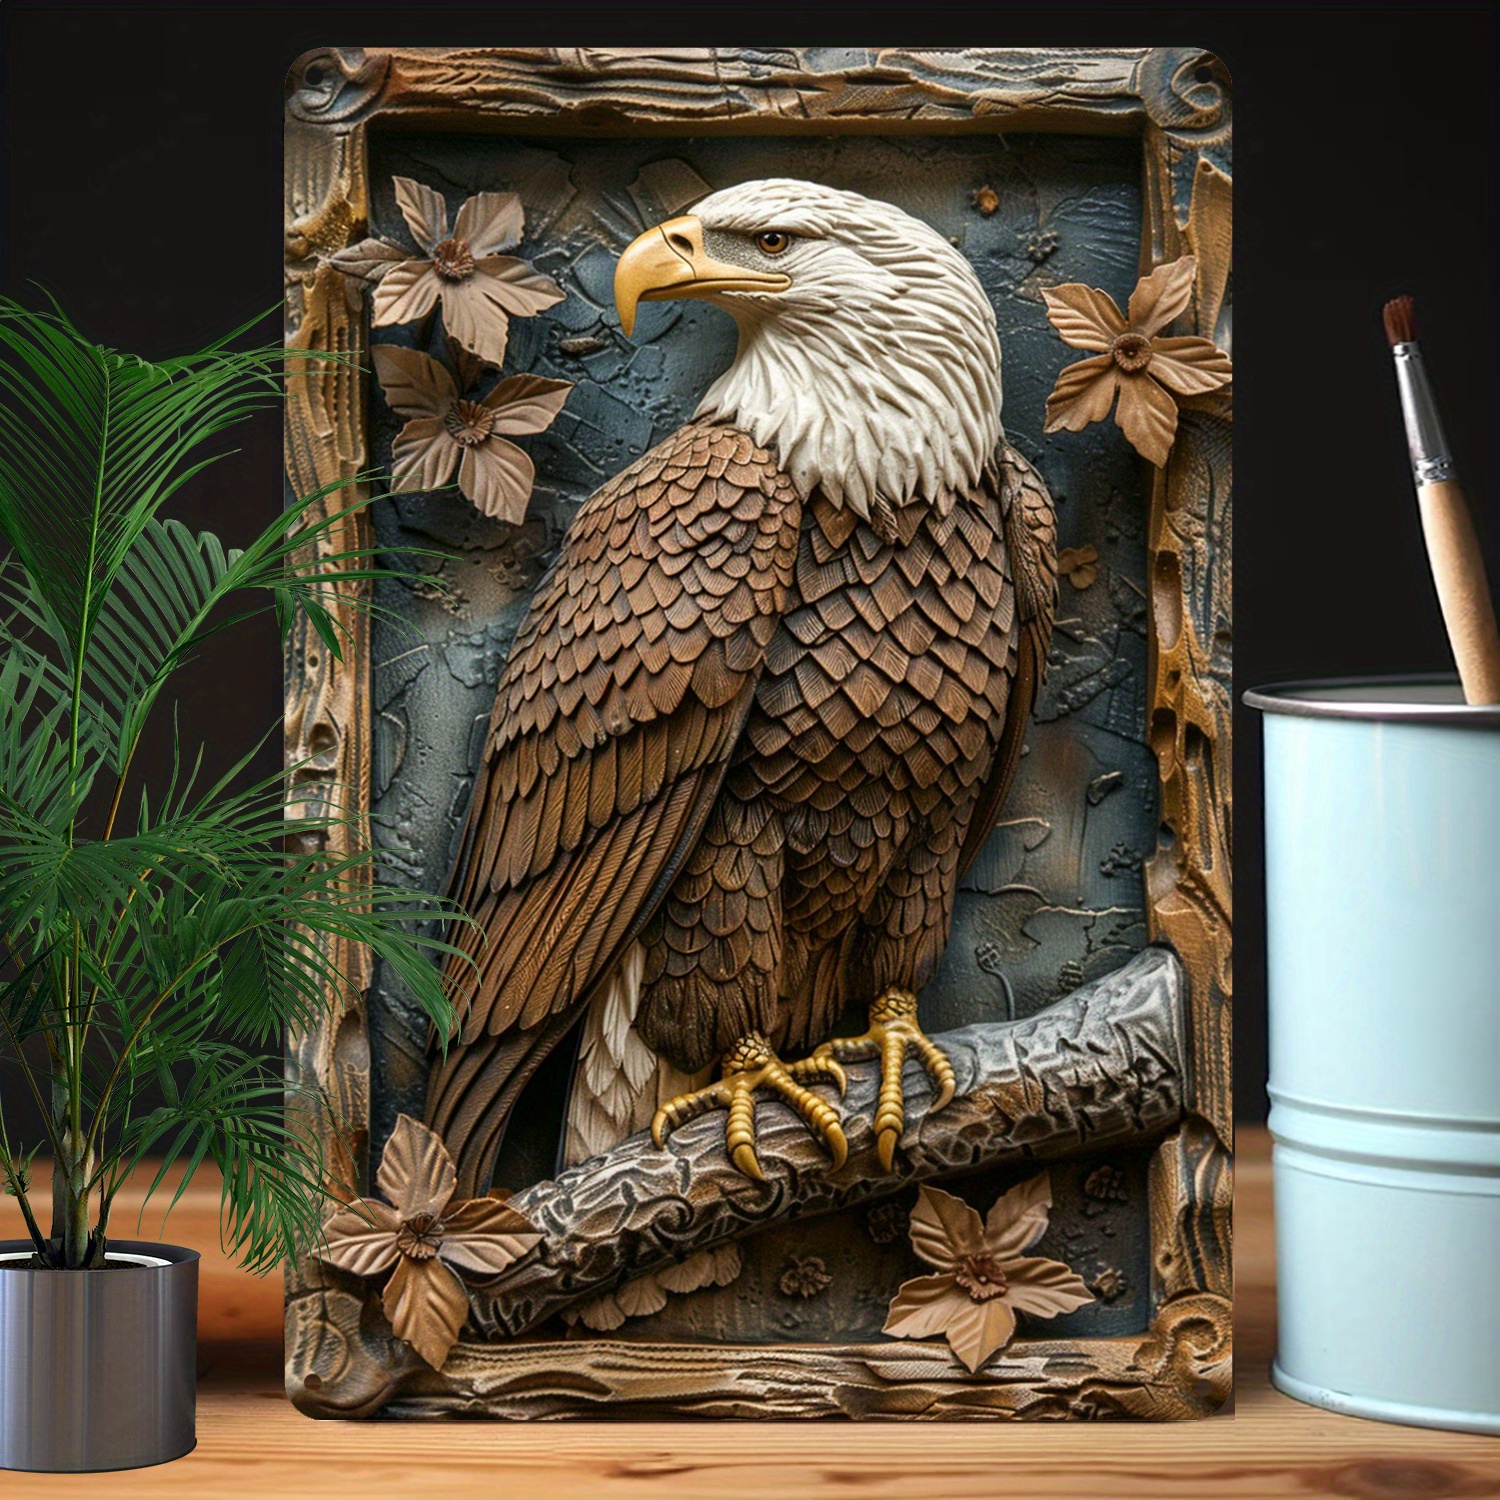 

Eagle 3d Metal Wall Art, 1pc 8x12 Inch Aluminum Eagle Sculpture With High-relief Design, Moisture-resistant Wall Decor For Home, Office, And Classroom, Durable Autumn Eagle Wall Art Gift A724